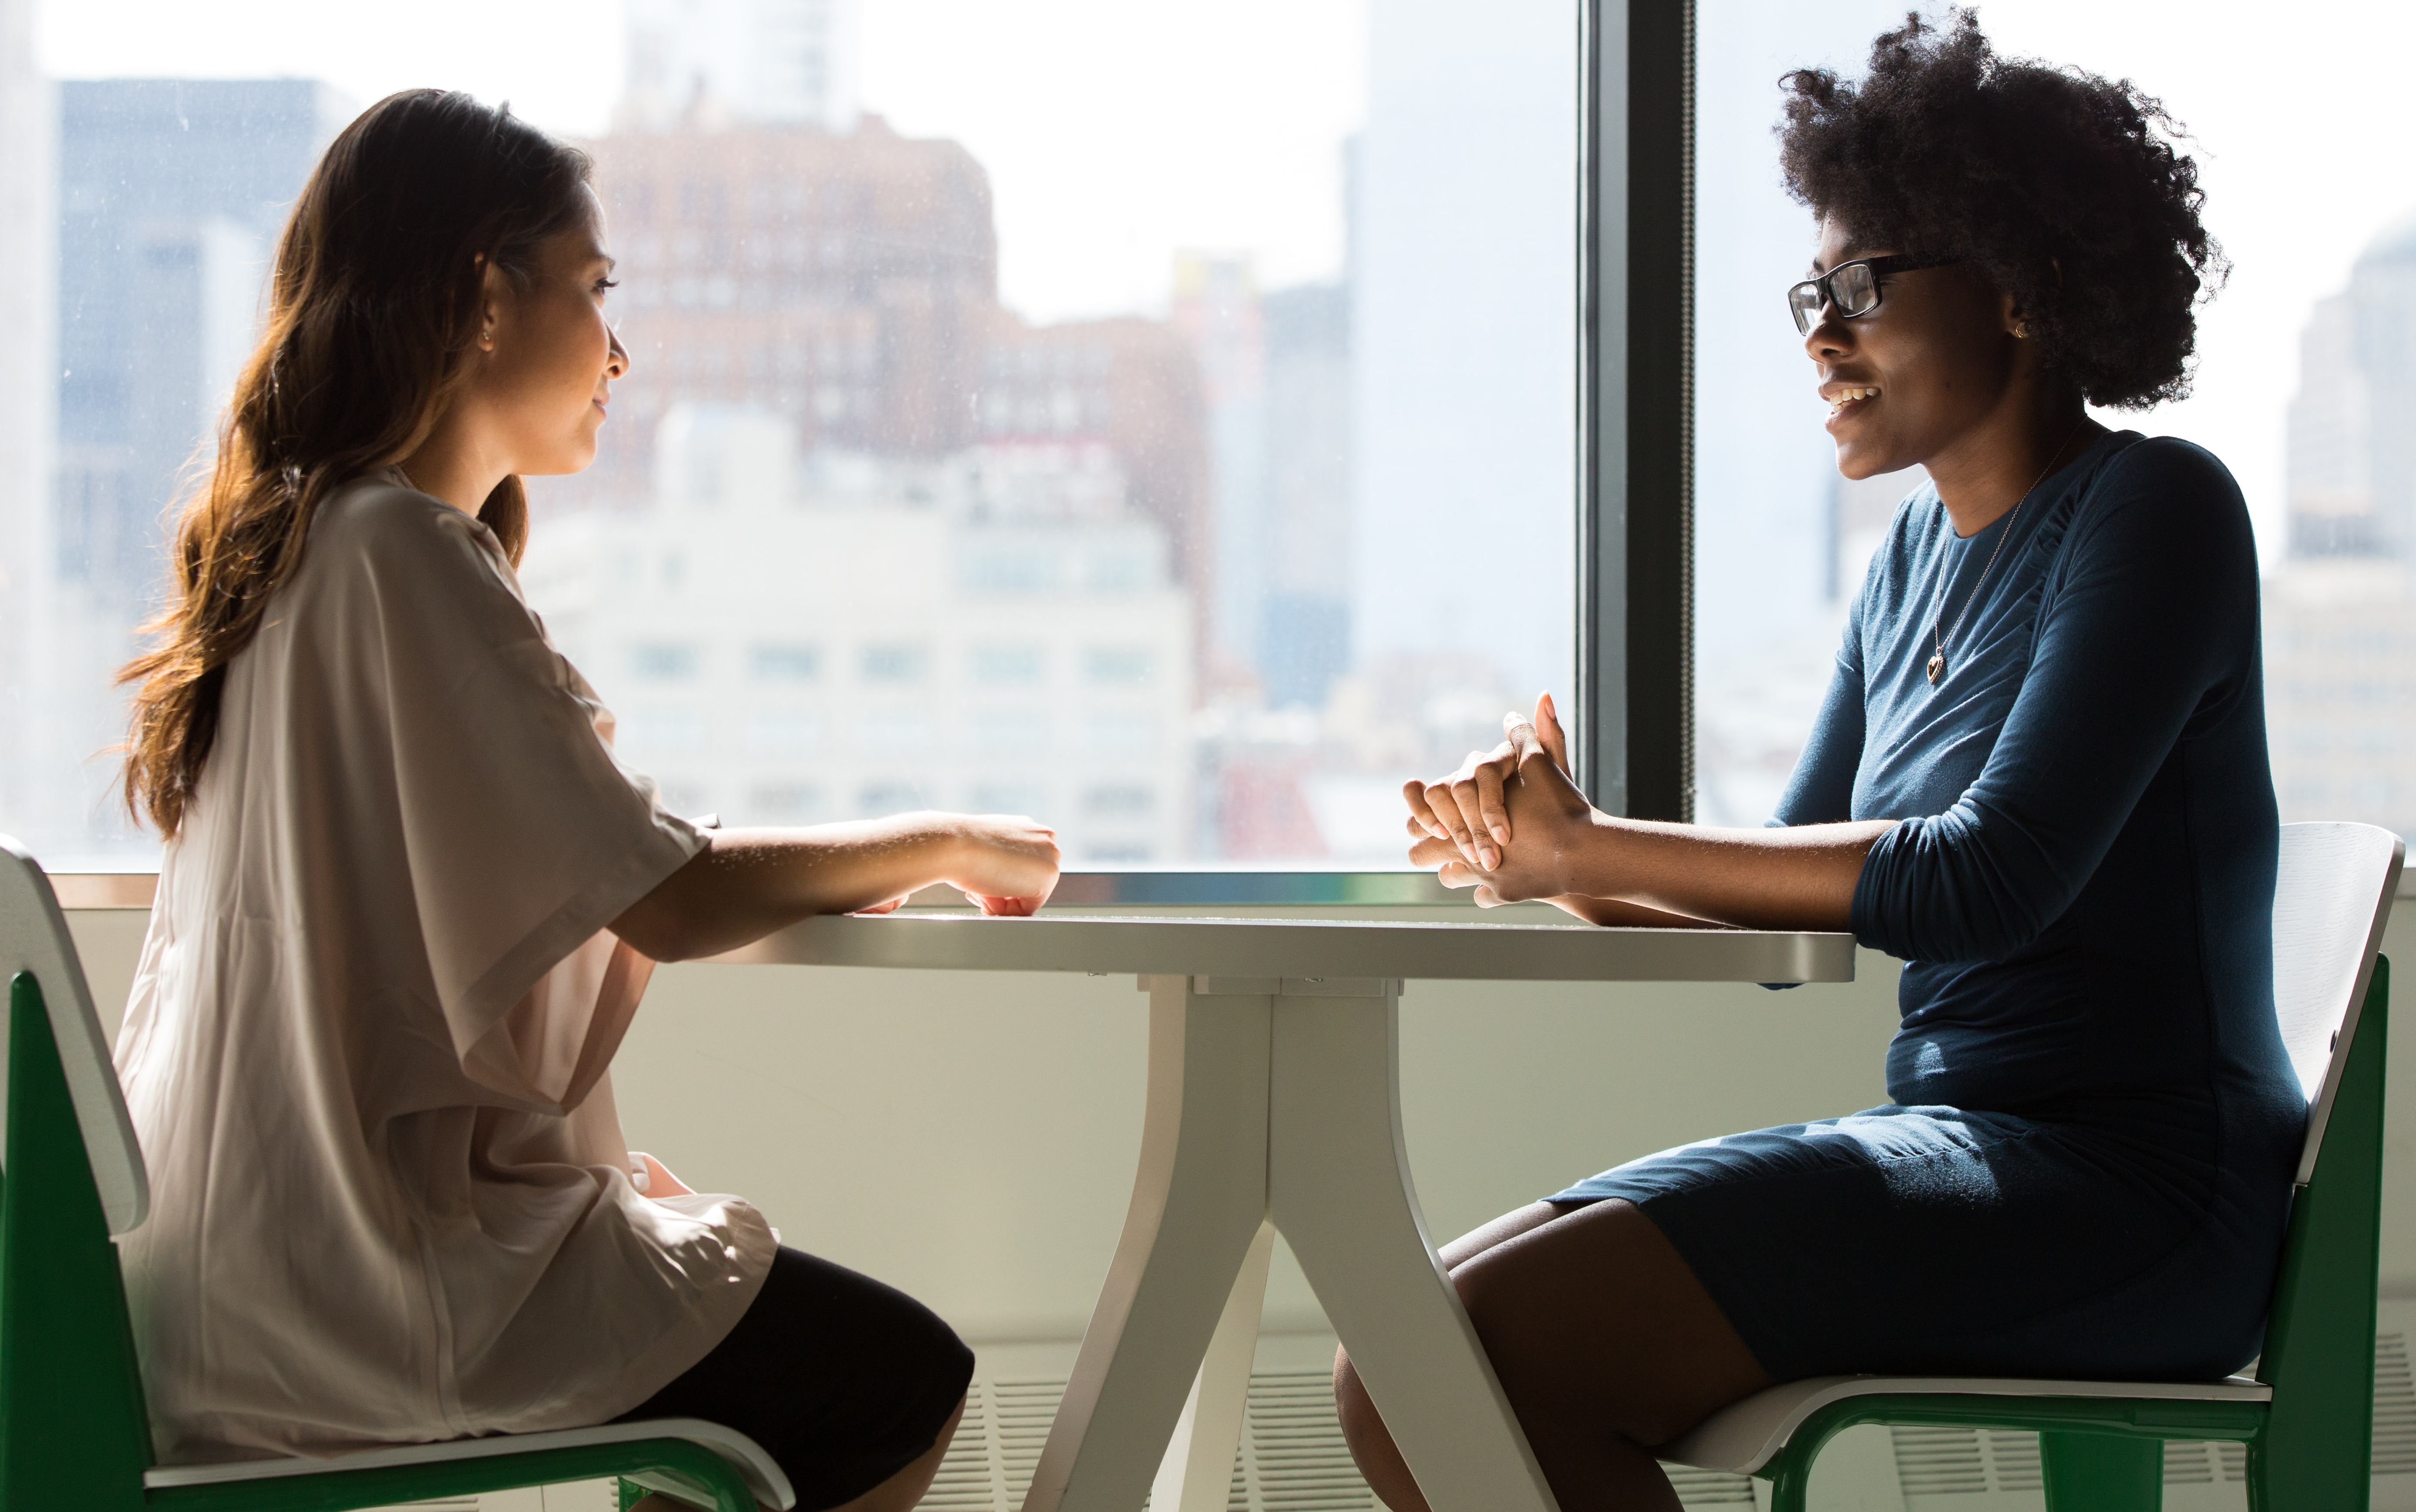 Two women of color sit an office table talking. We see their arms rest of the table before them and a city skyline through the window.